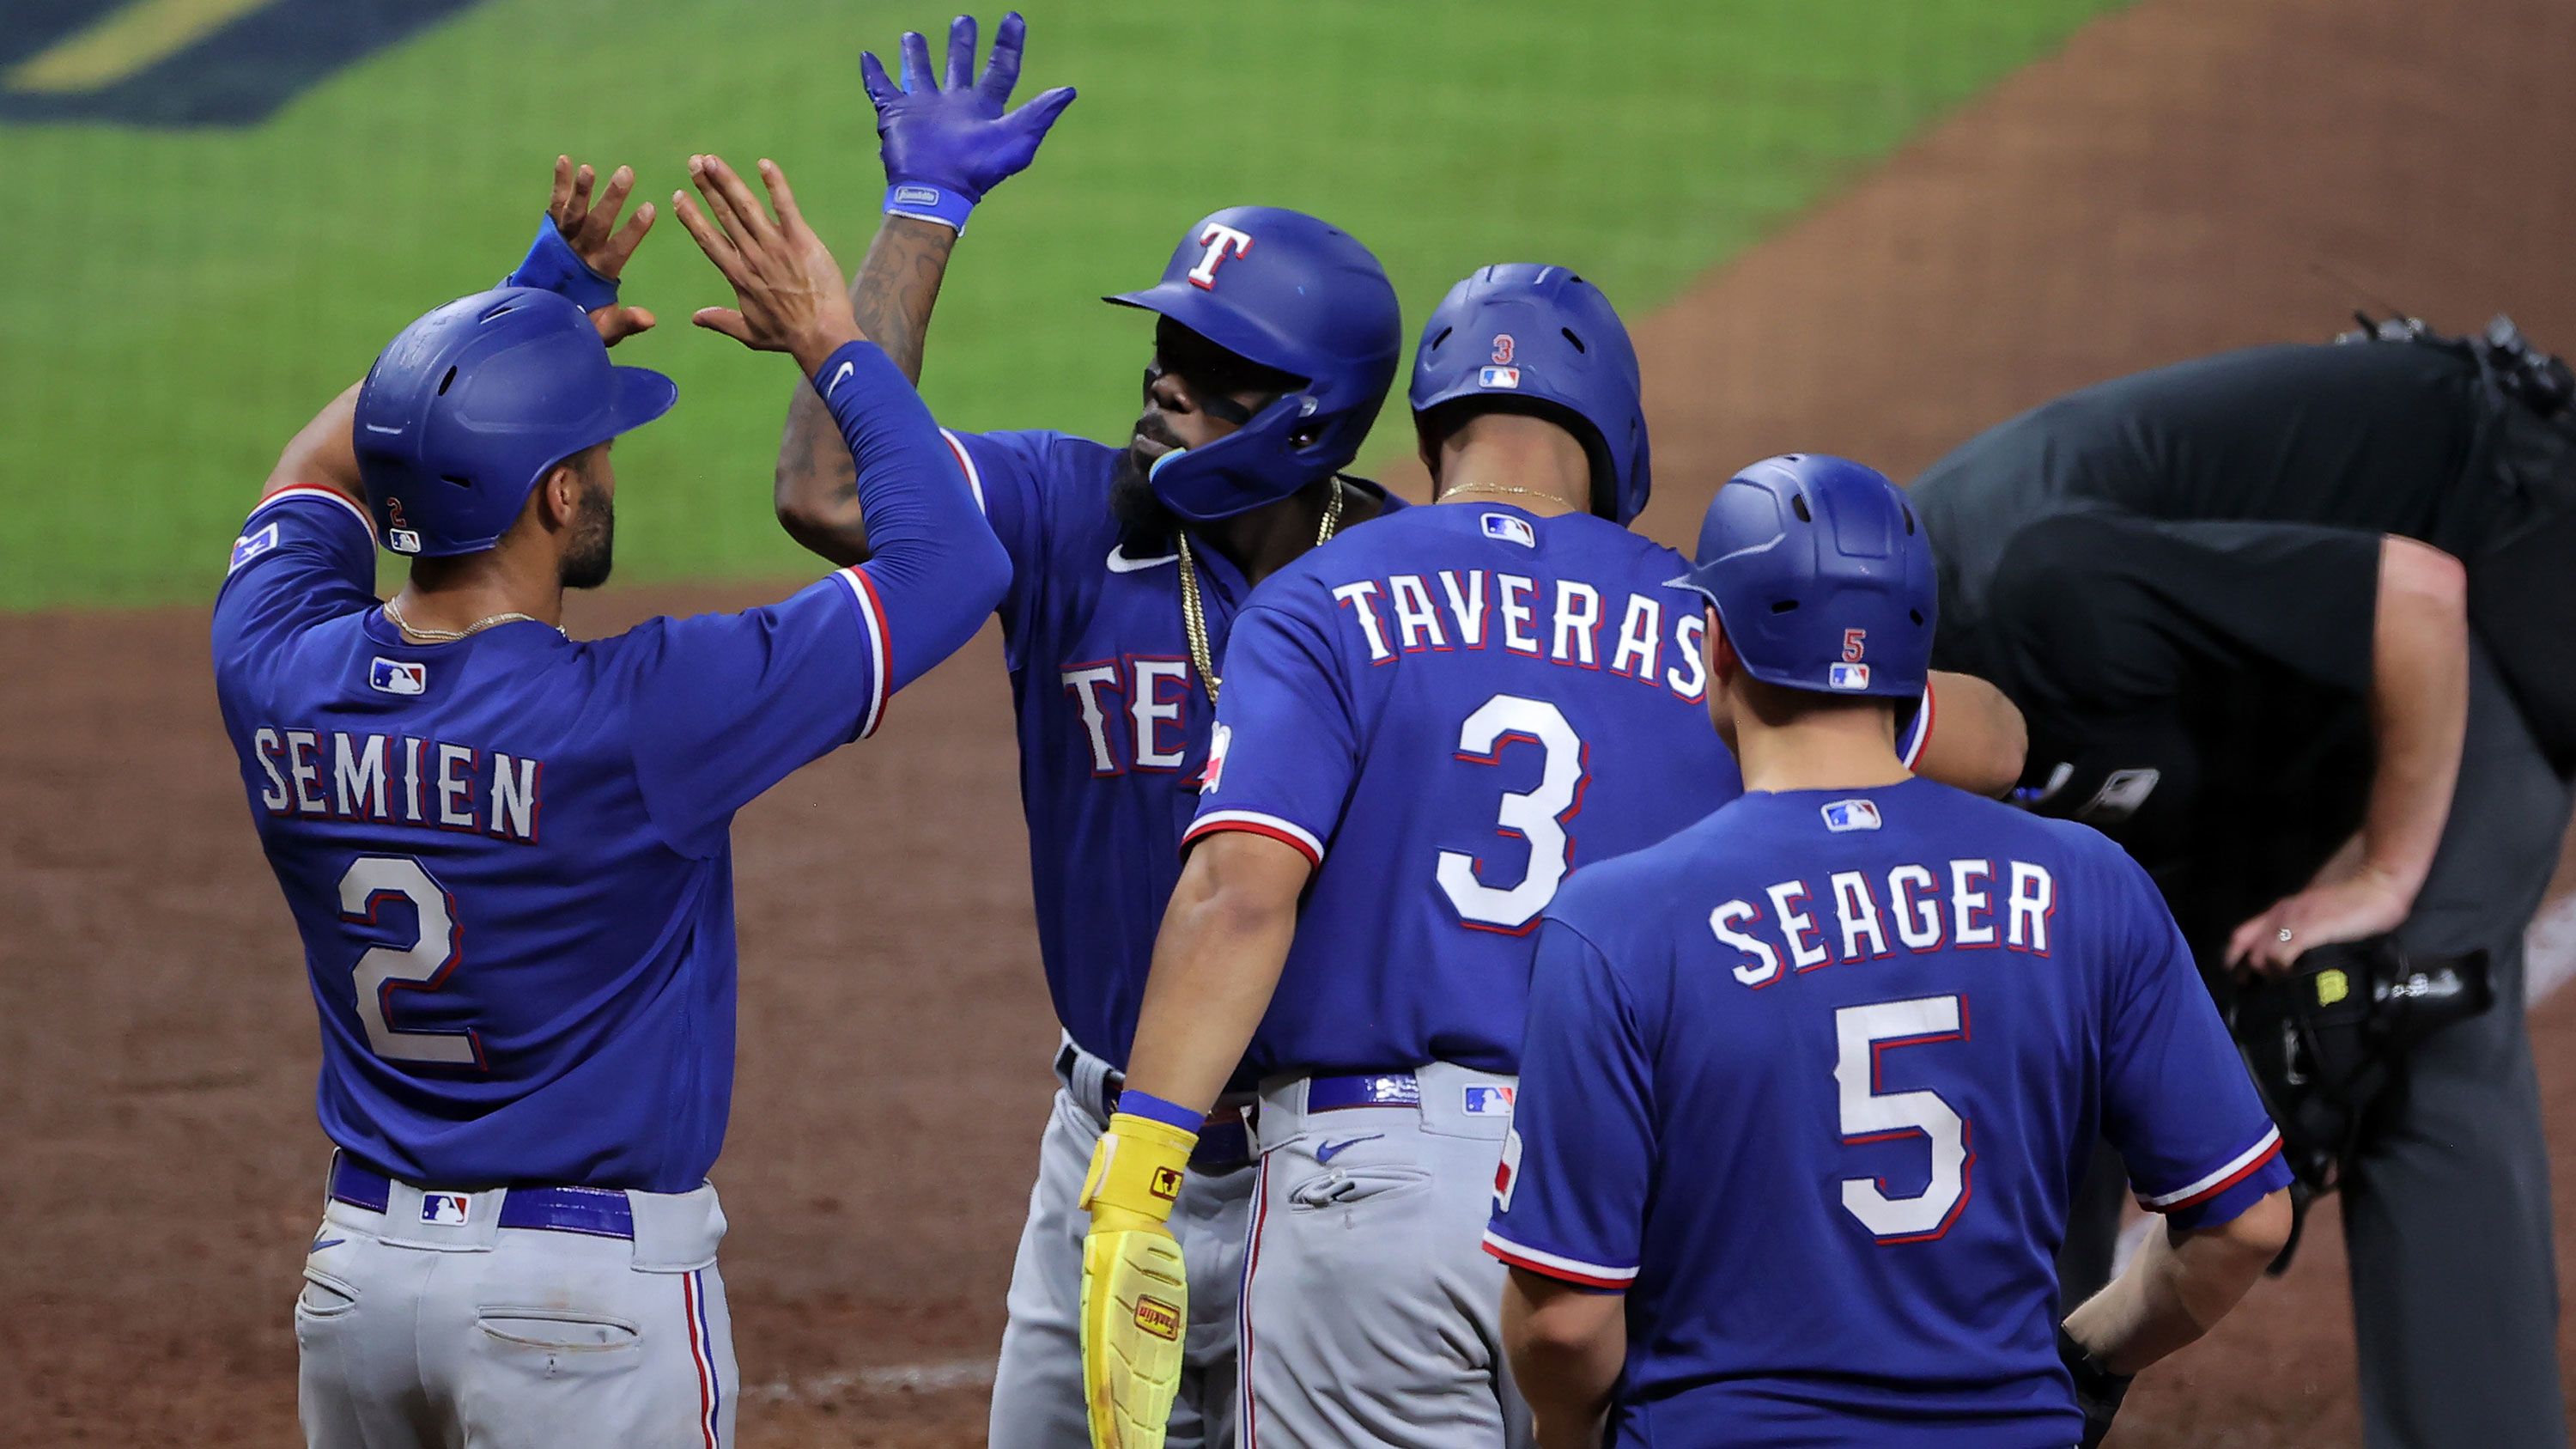 Rangers got a 9-2 win over Astros to force Game 7 in ALCS